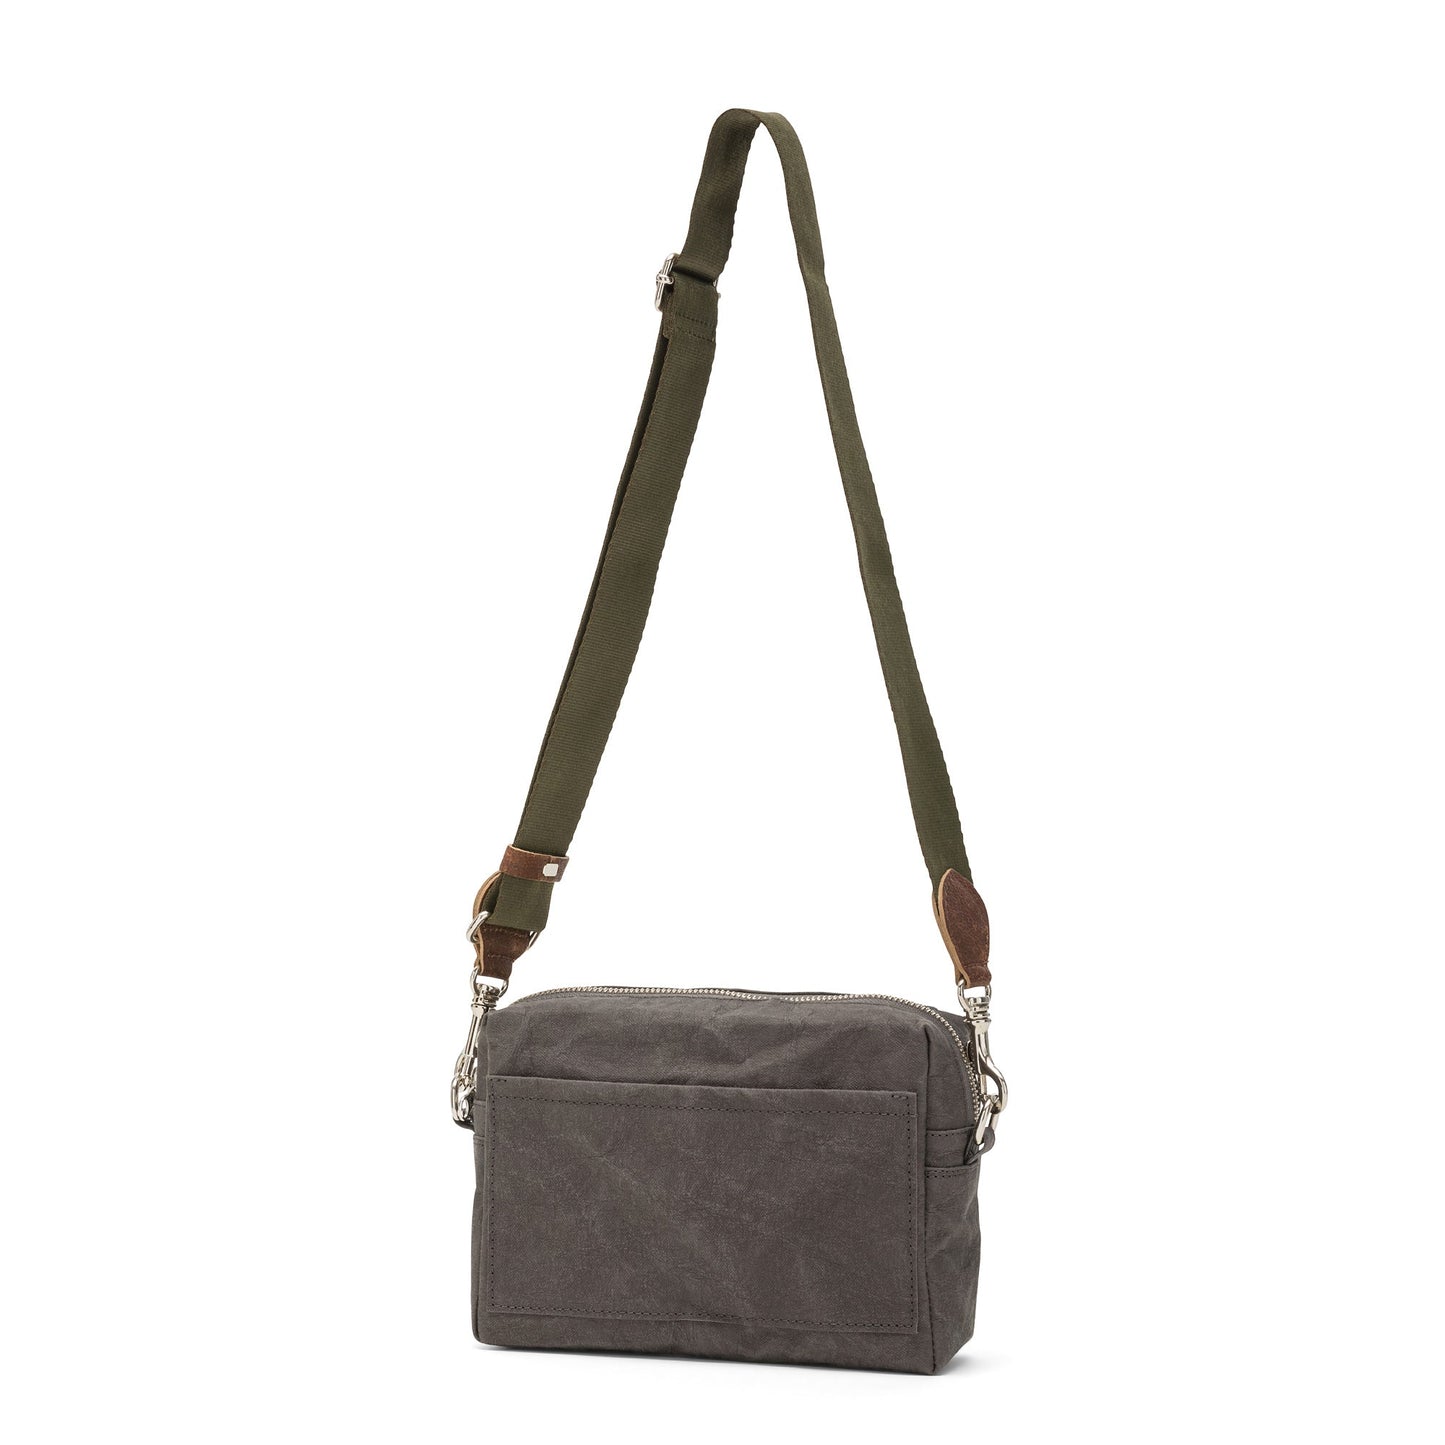 A rectangular washable paper handbag with an external side pocket is shown. The bag has a canvas strap, washable paper details and metal fastening clips to attach the straps to the bag. The bag closes by a zip. The bag shown is dark grey with an olive strap.